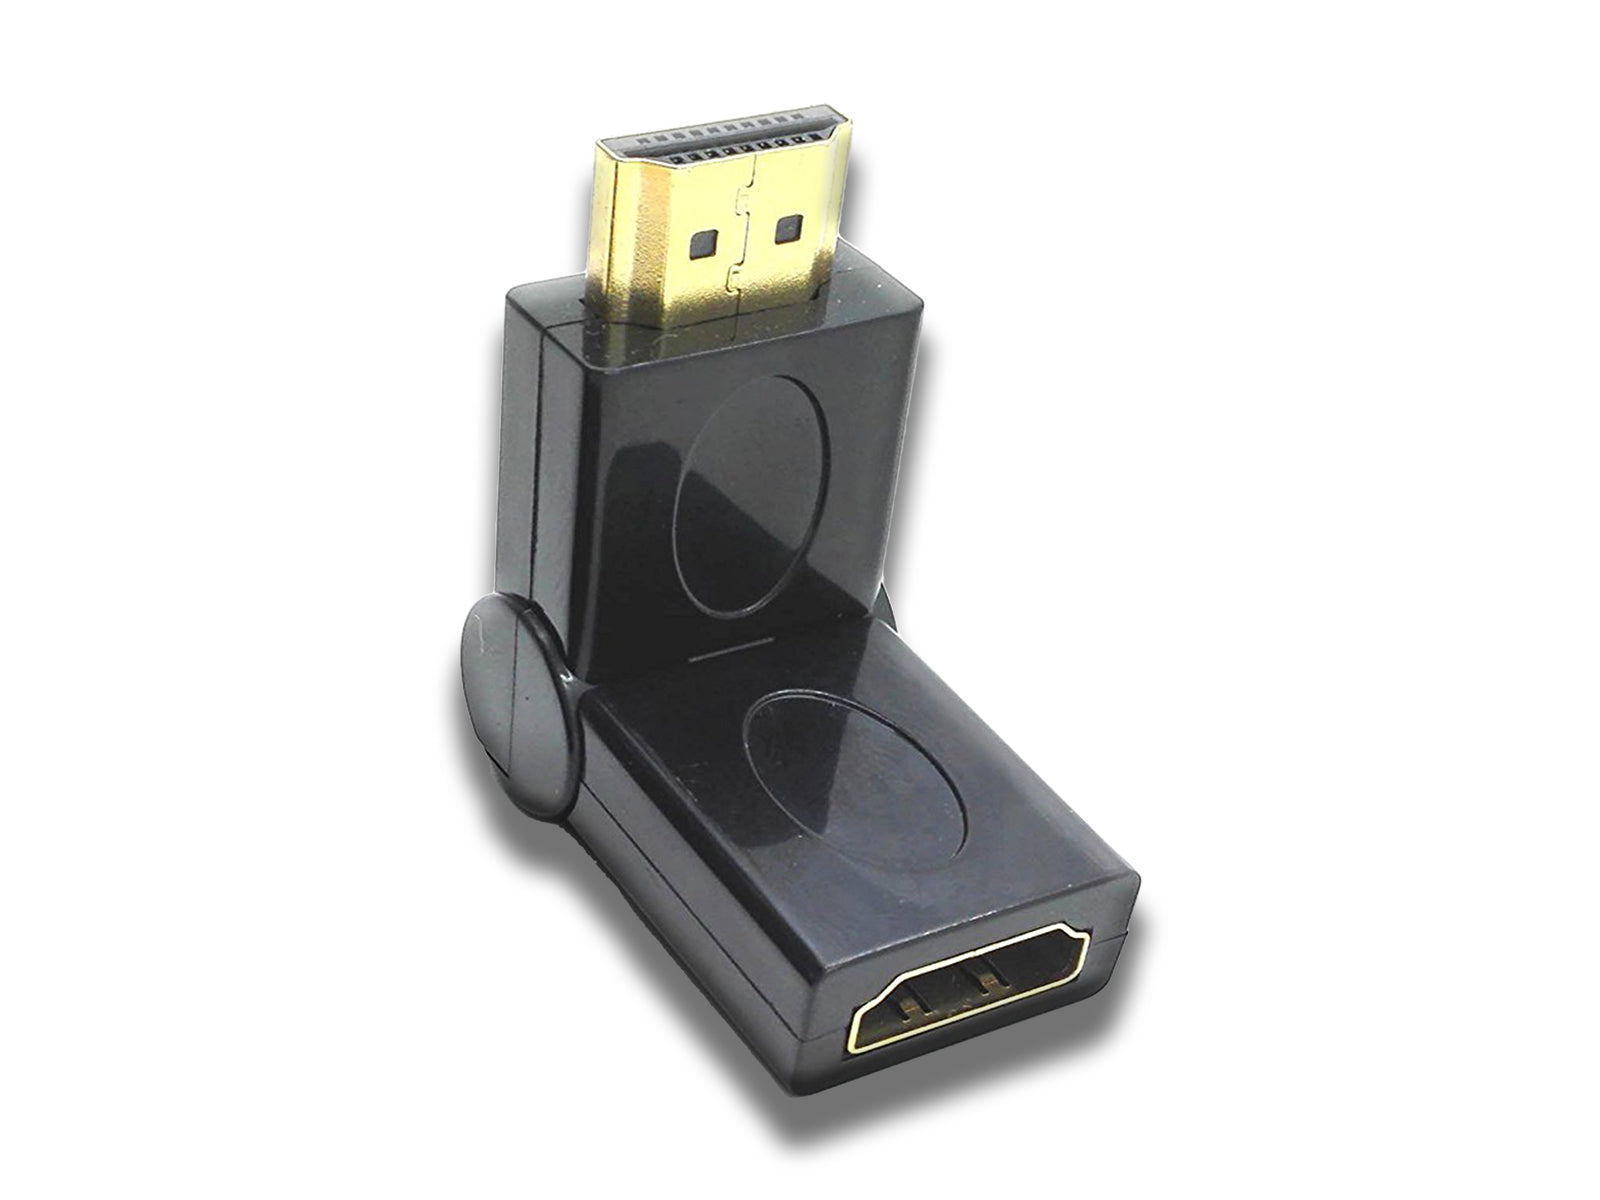 Front-left-side-view-image-of-the-4K-HDMI-Adapter-on-the-white-background